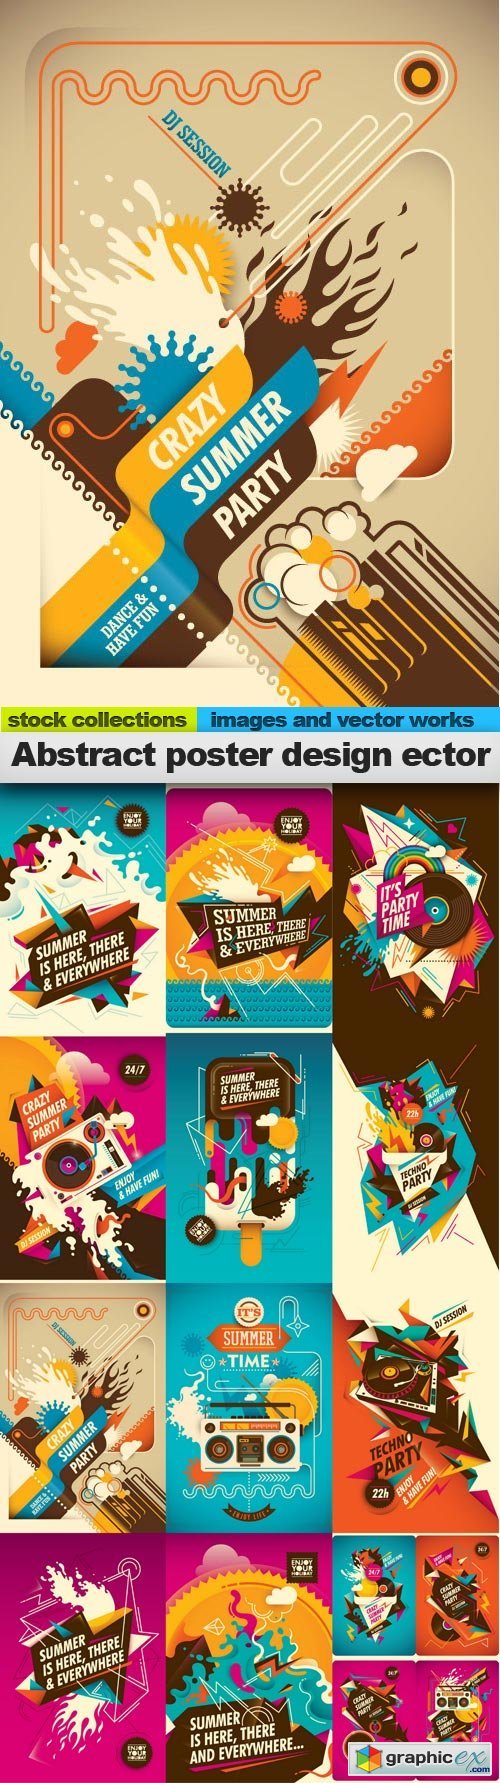 Abstract poster design vector, 15 x EPS